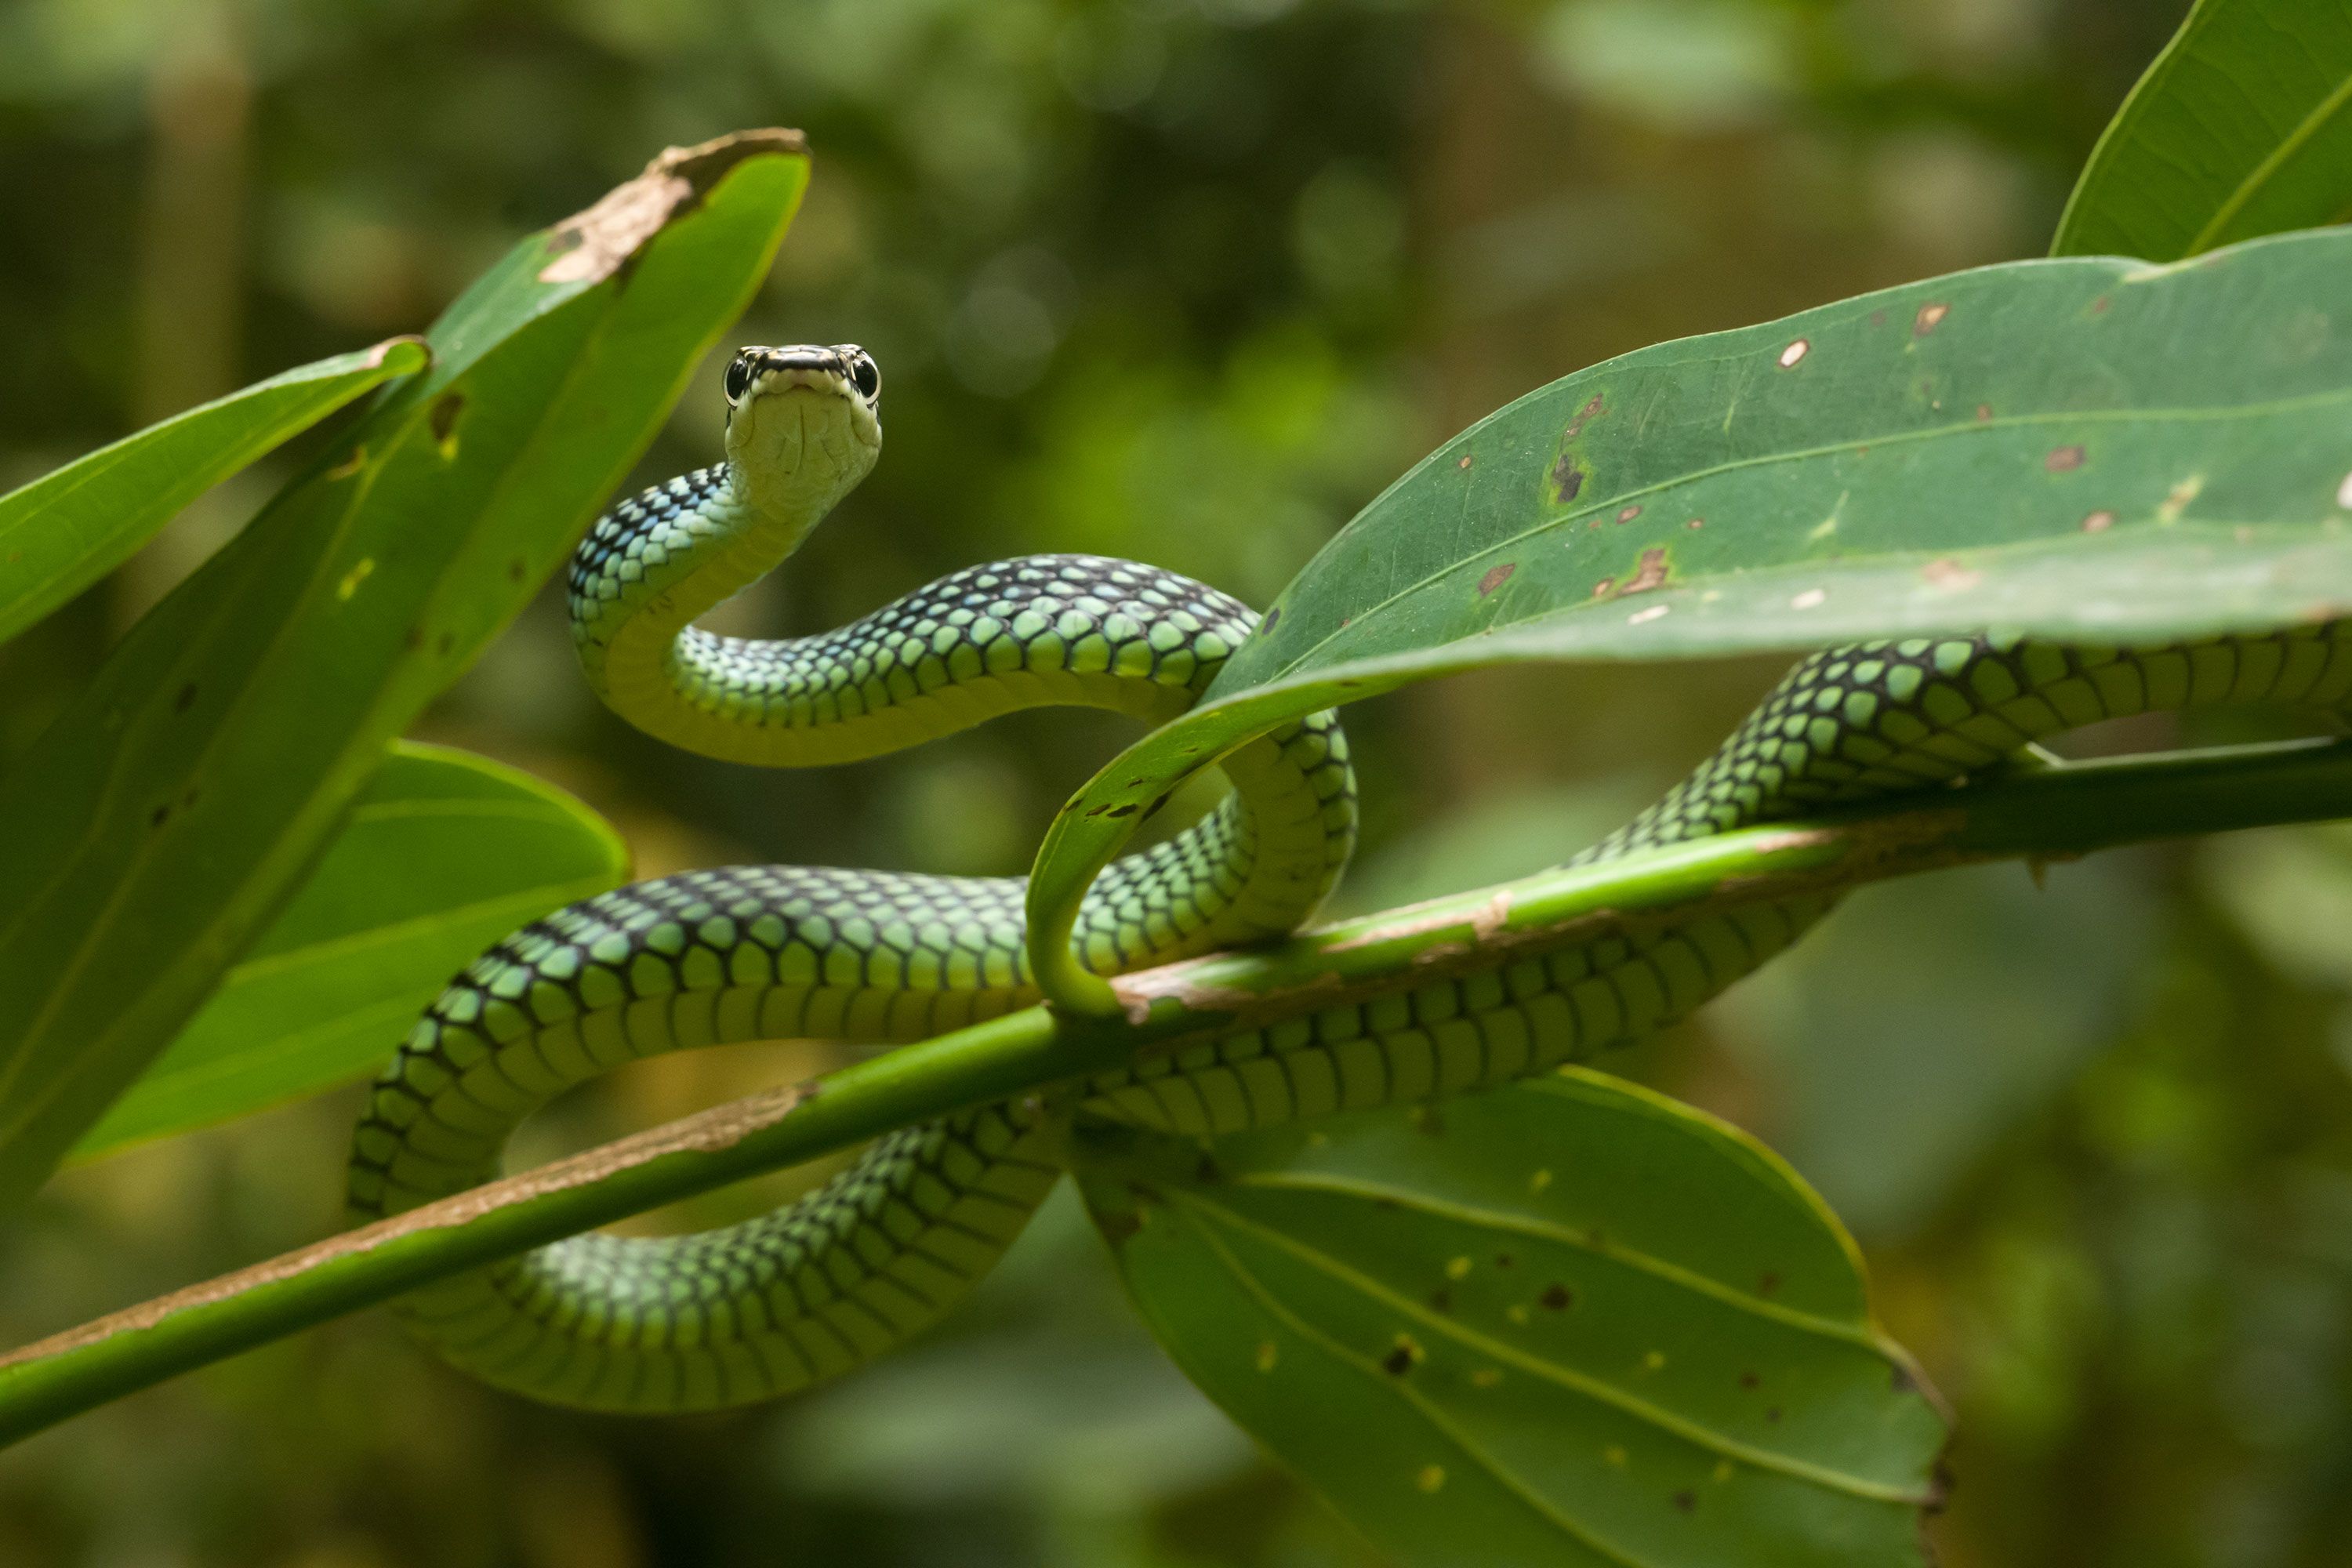 Beautiful Snakes - 10 Most Stunningly Pretty Snakes You Won’t Believe Actually Exist - Paradise Flying Snake